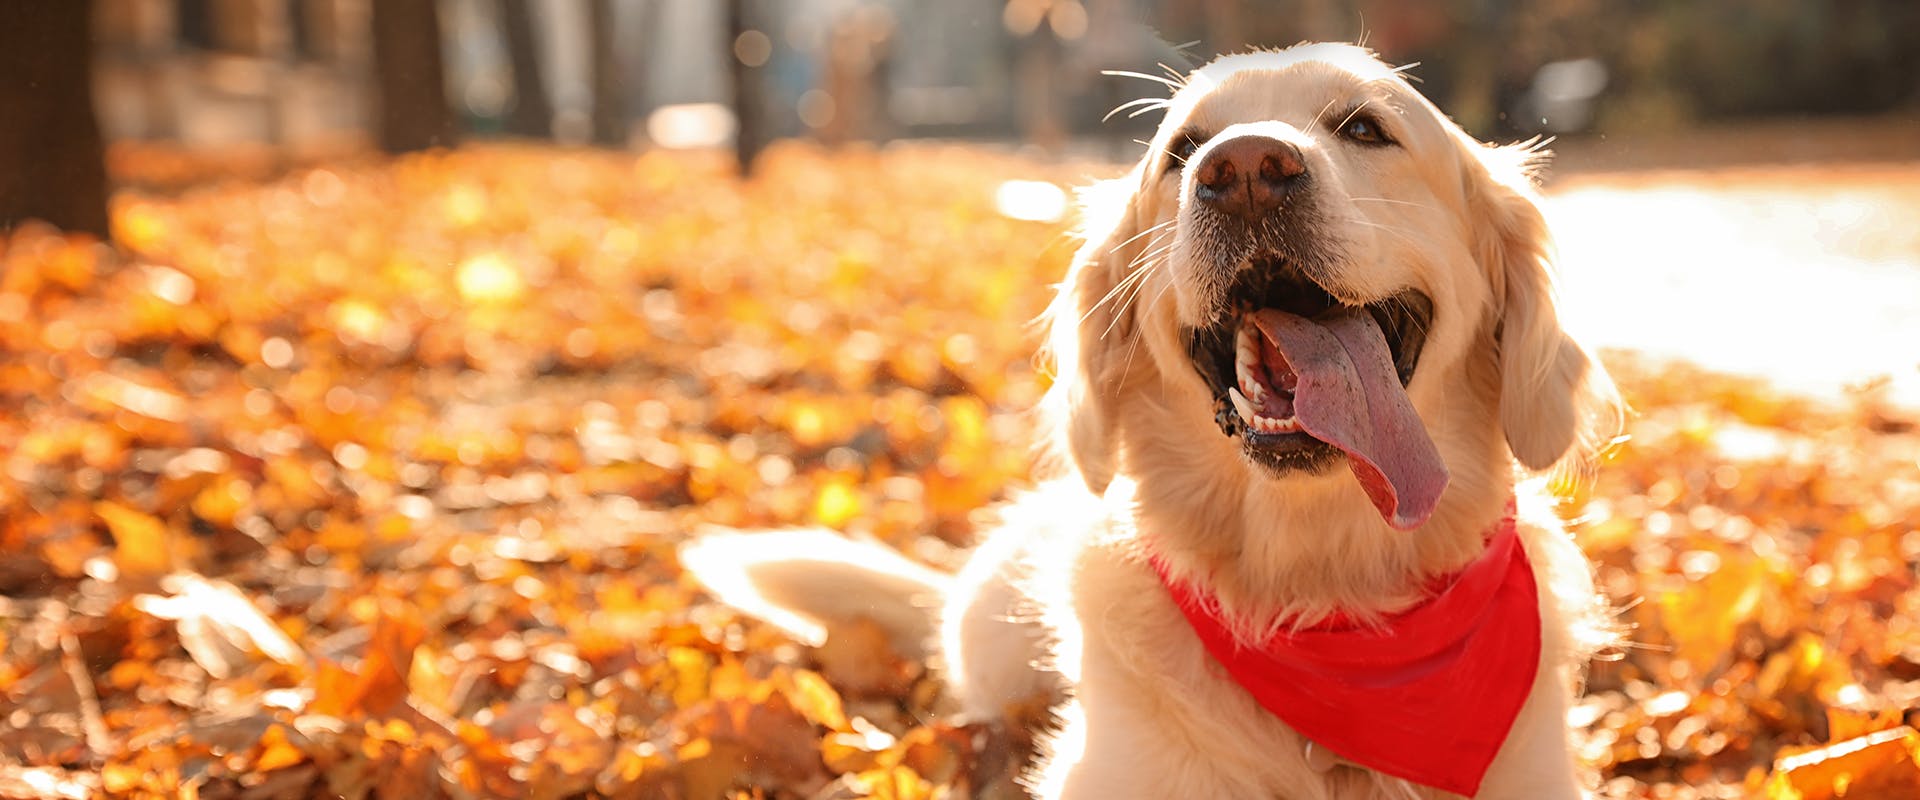 A Golden Retriever dog sitting in a pile of autumn leaves